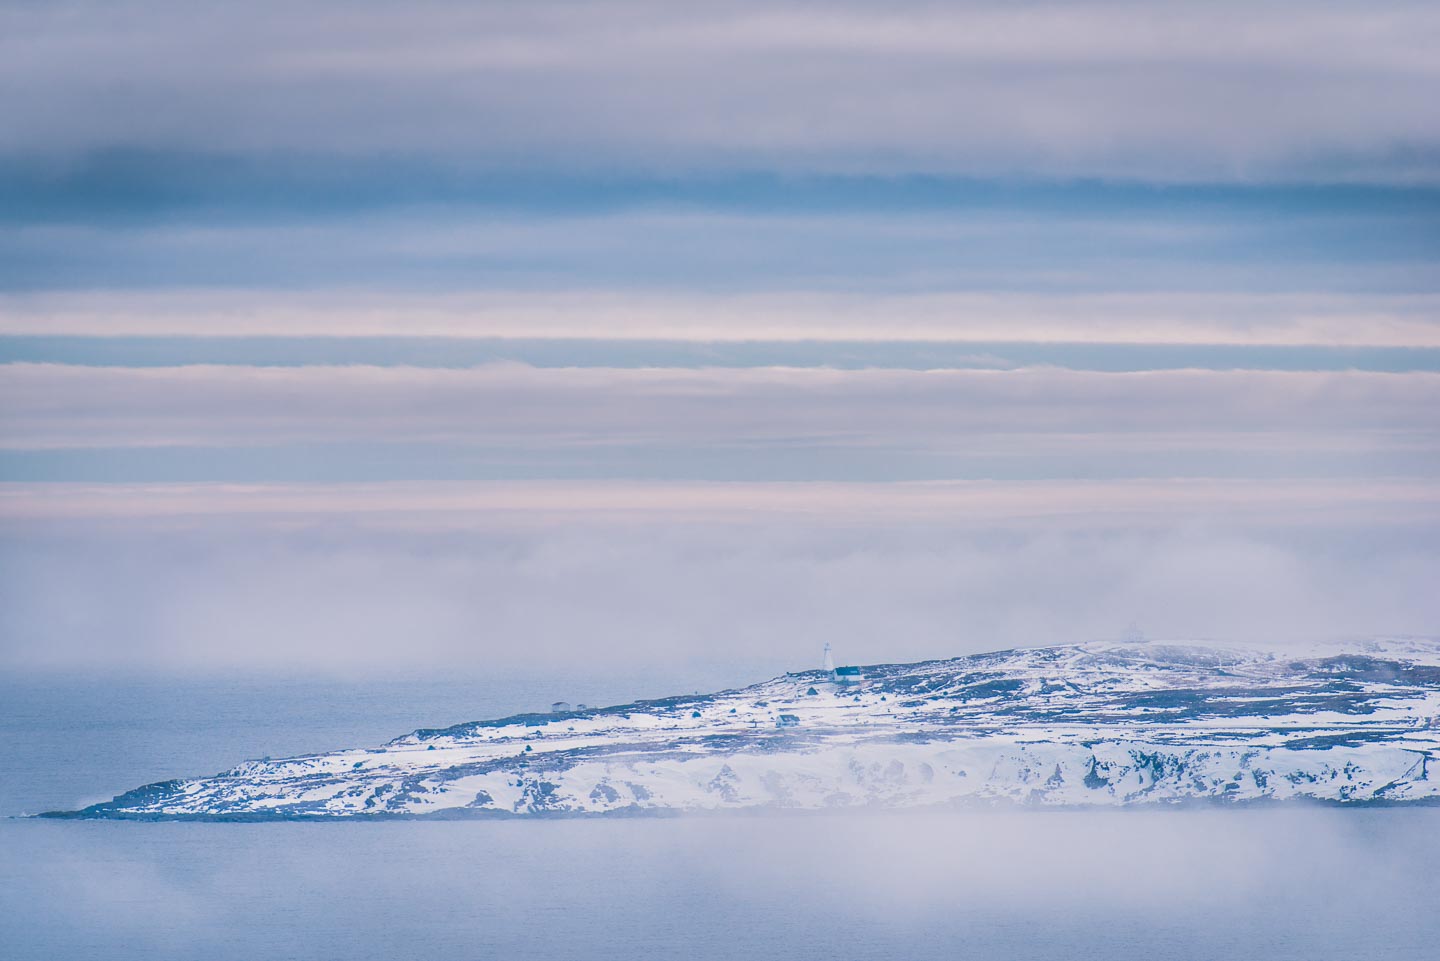 Cape Spear in the mist. What a dreamlike photograph this turned out to be, almost like a painting.